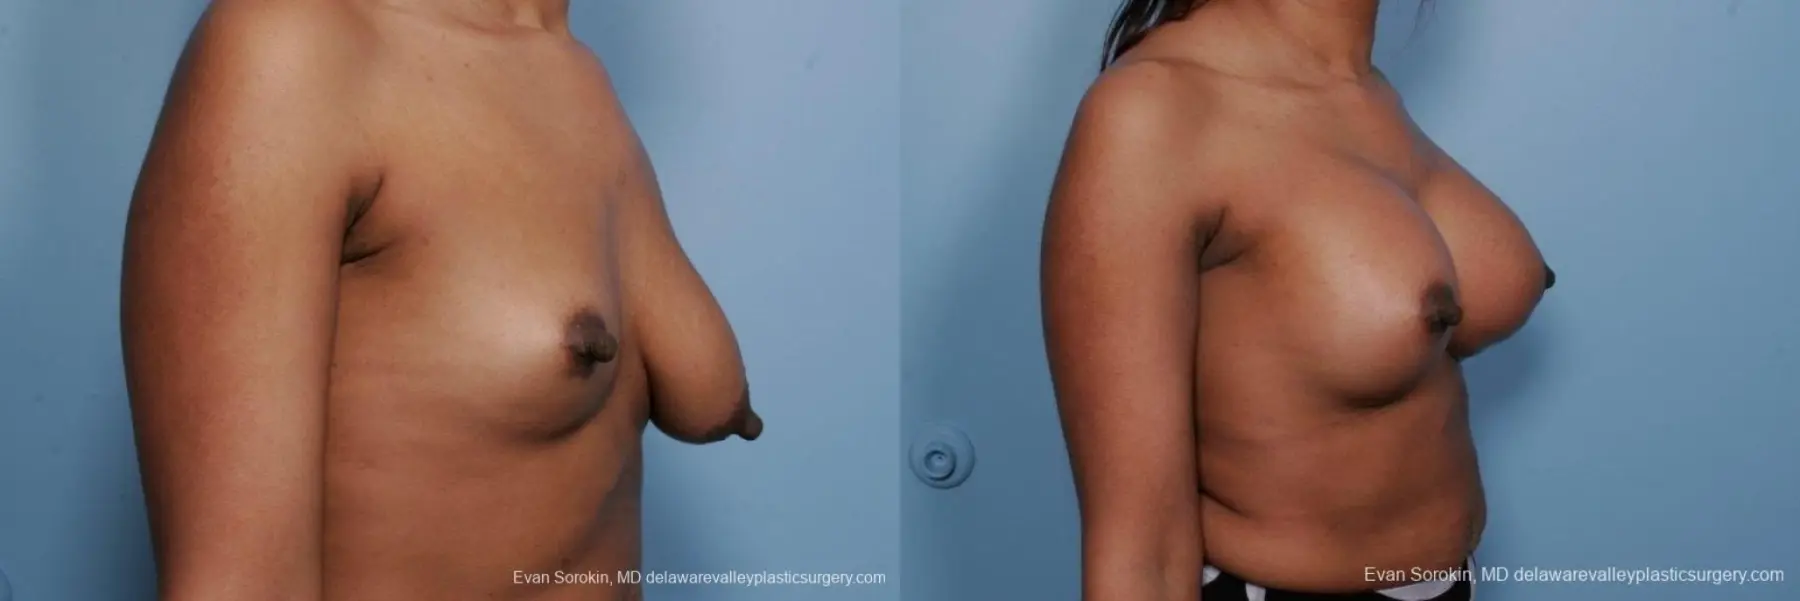 Philadelphia Breast Lift and Augmentation 8689 - Before and After 2